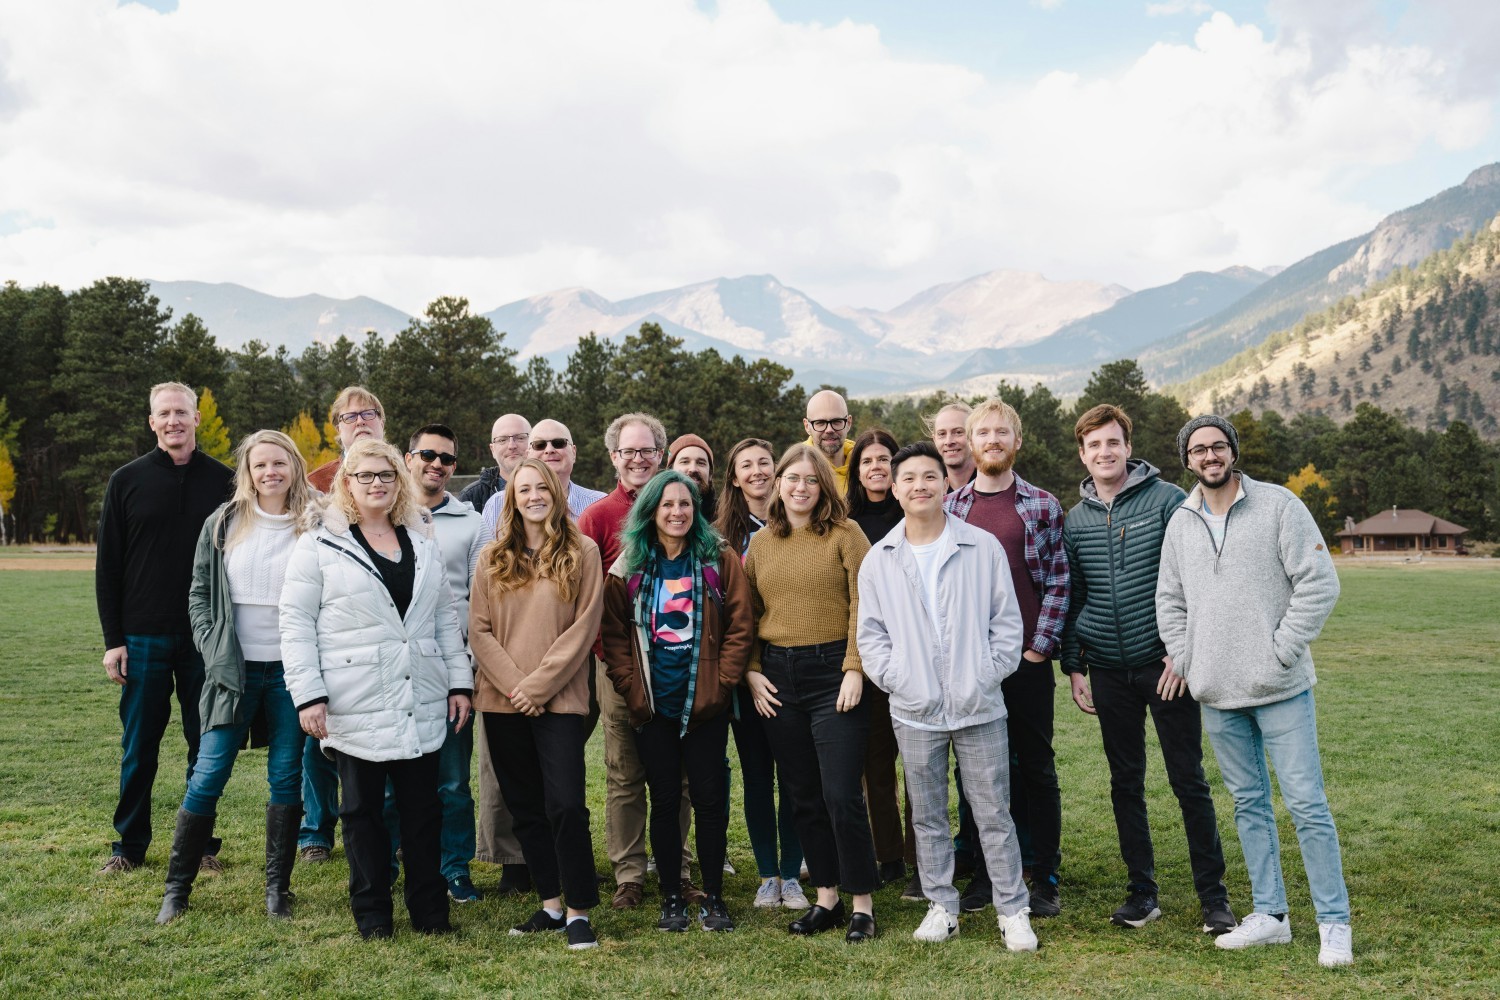 The InspiringApps team at a company retreat held in the beautiful mountains of Estes Park, Colorado.